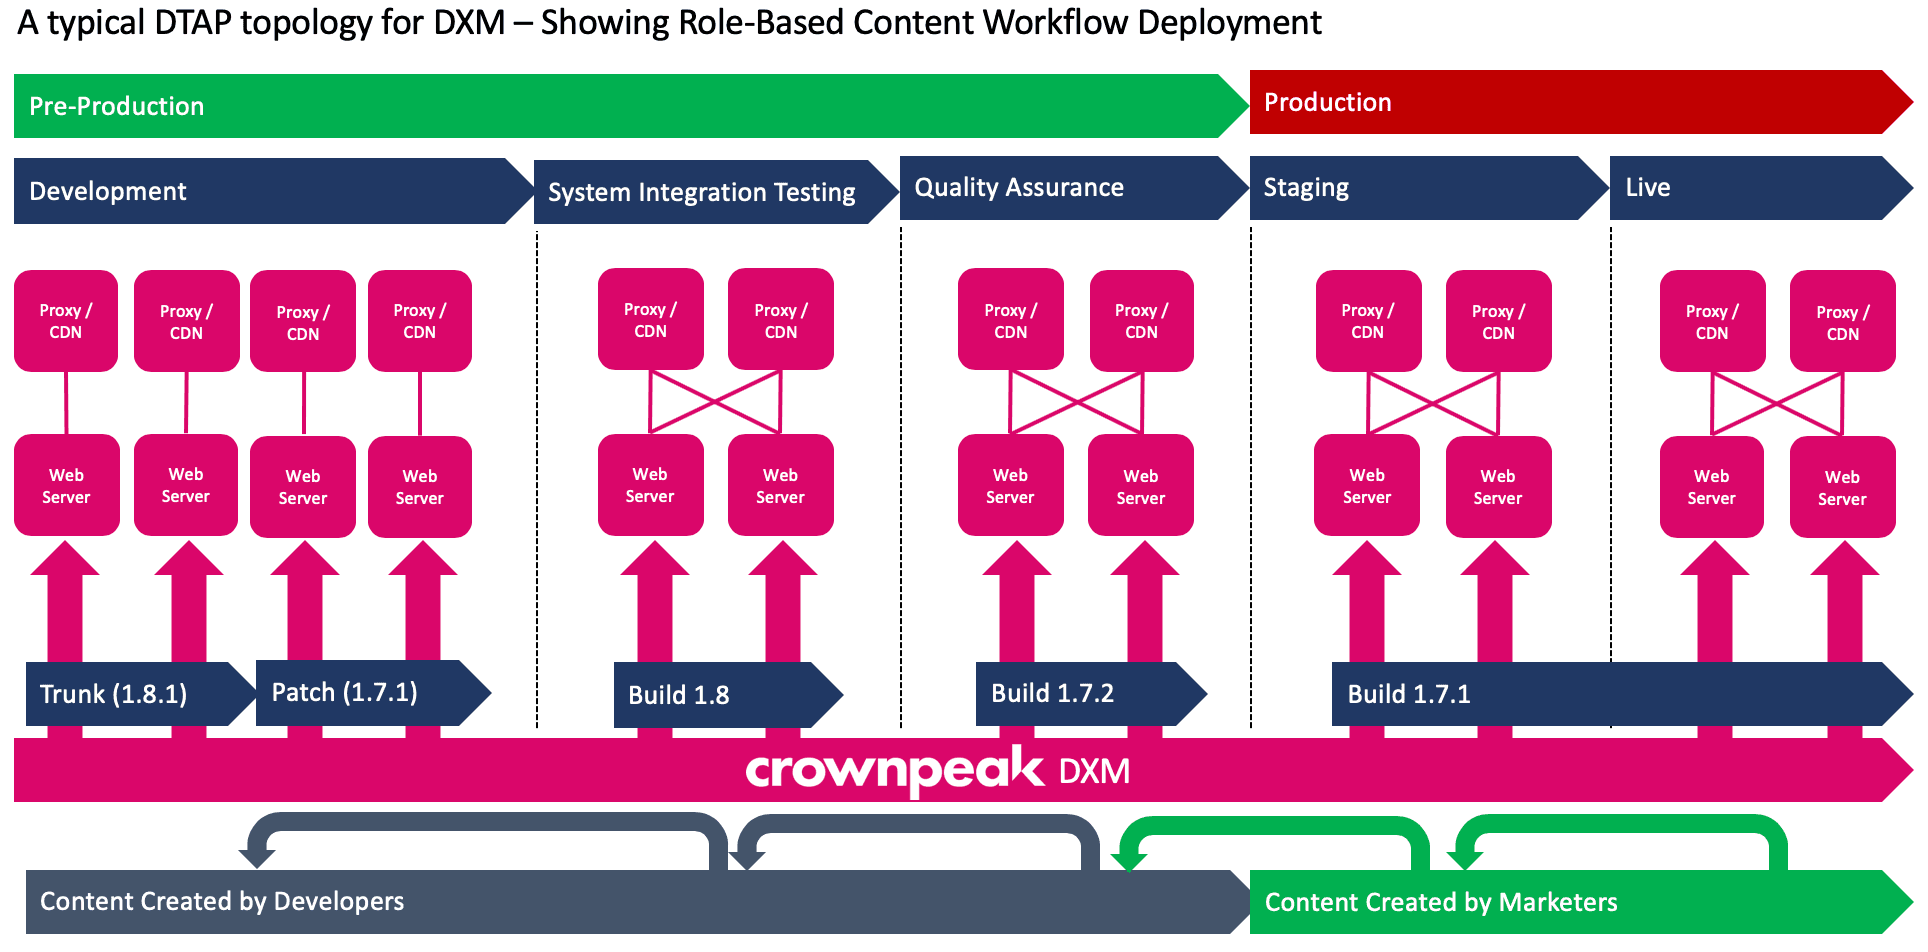 A traditional DTAP approach for Crownpeak DXM - Role-Based Content Workflow Deployment - Diagram